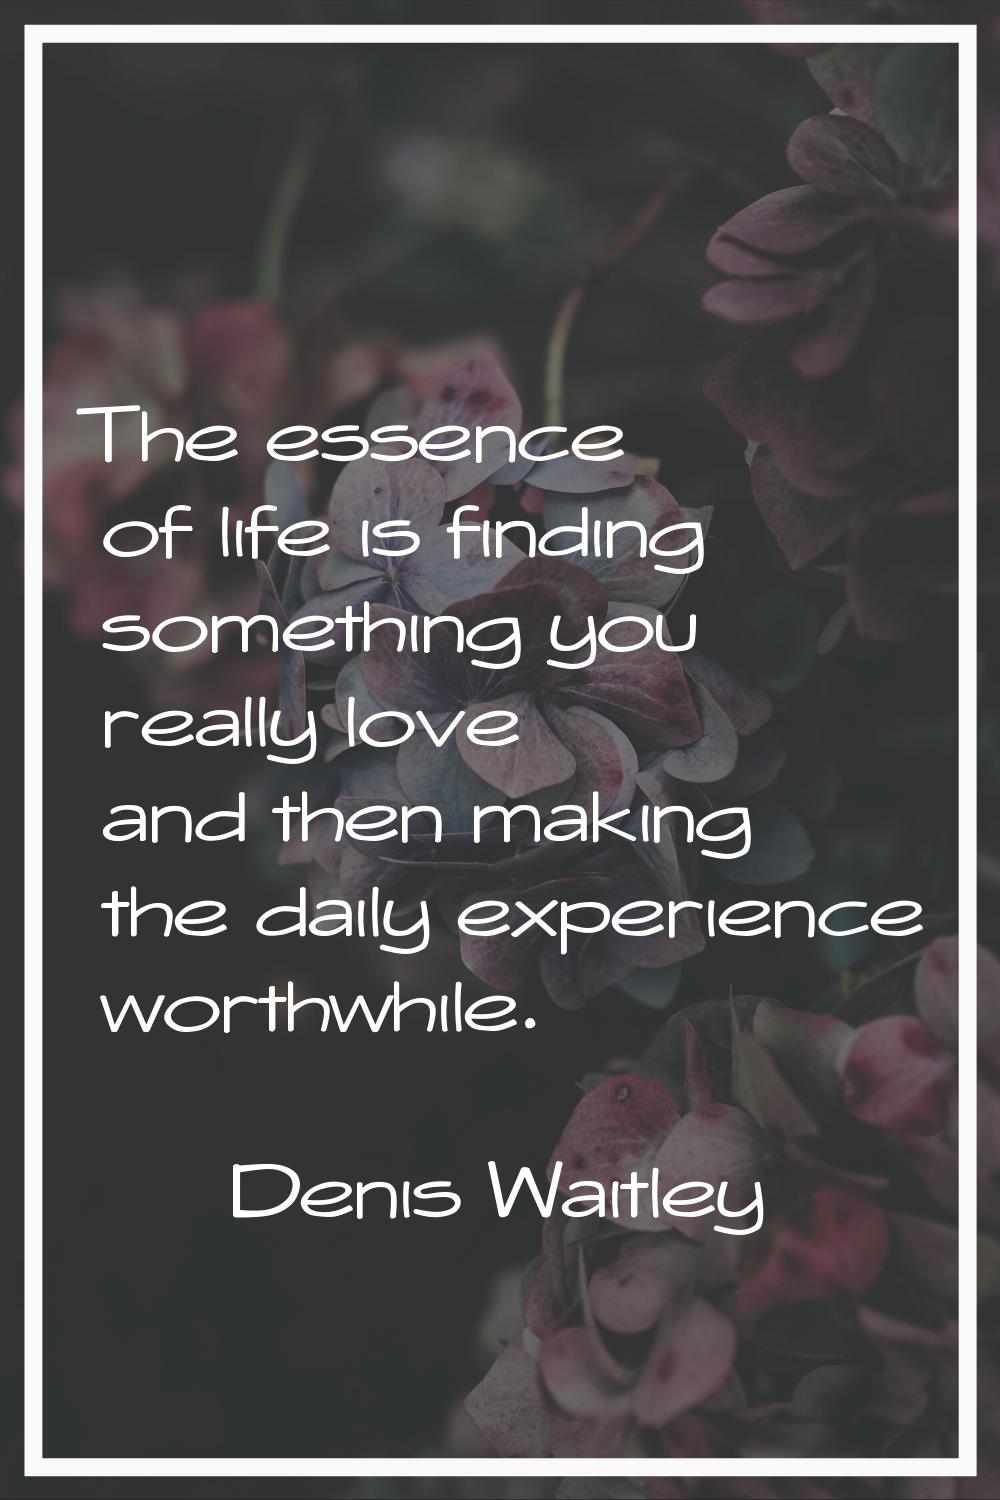 The essence of life is finding something you really love and then making the daily experience worth